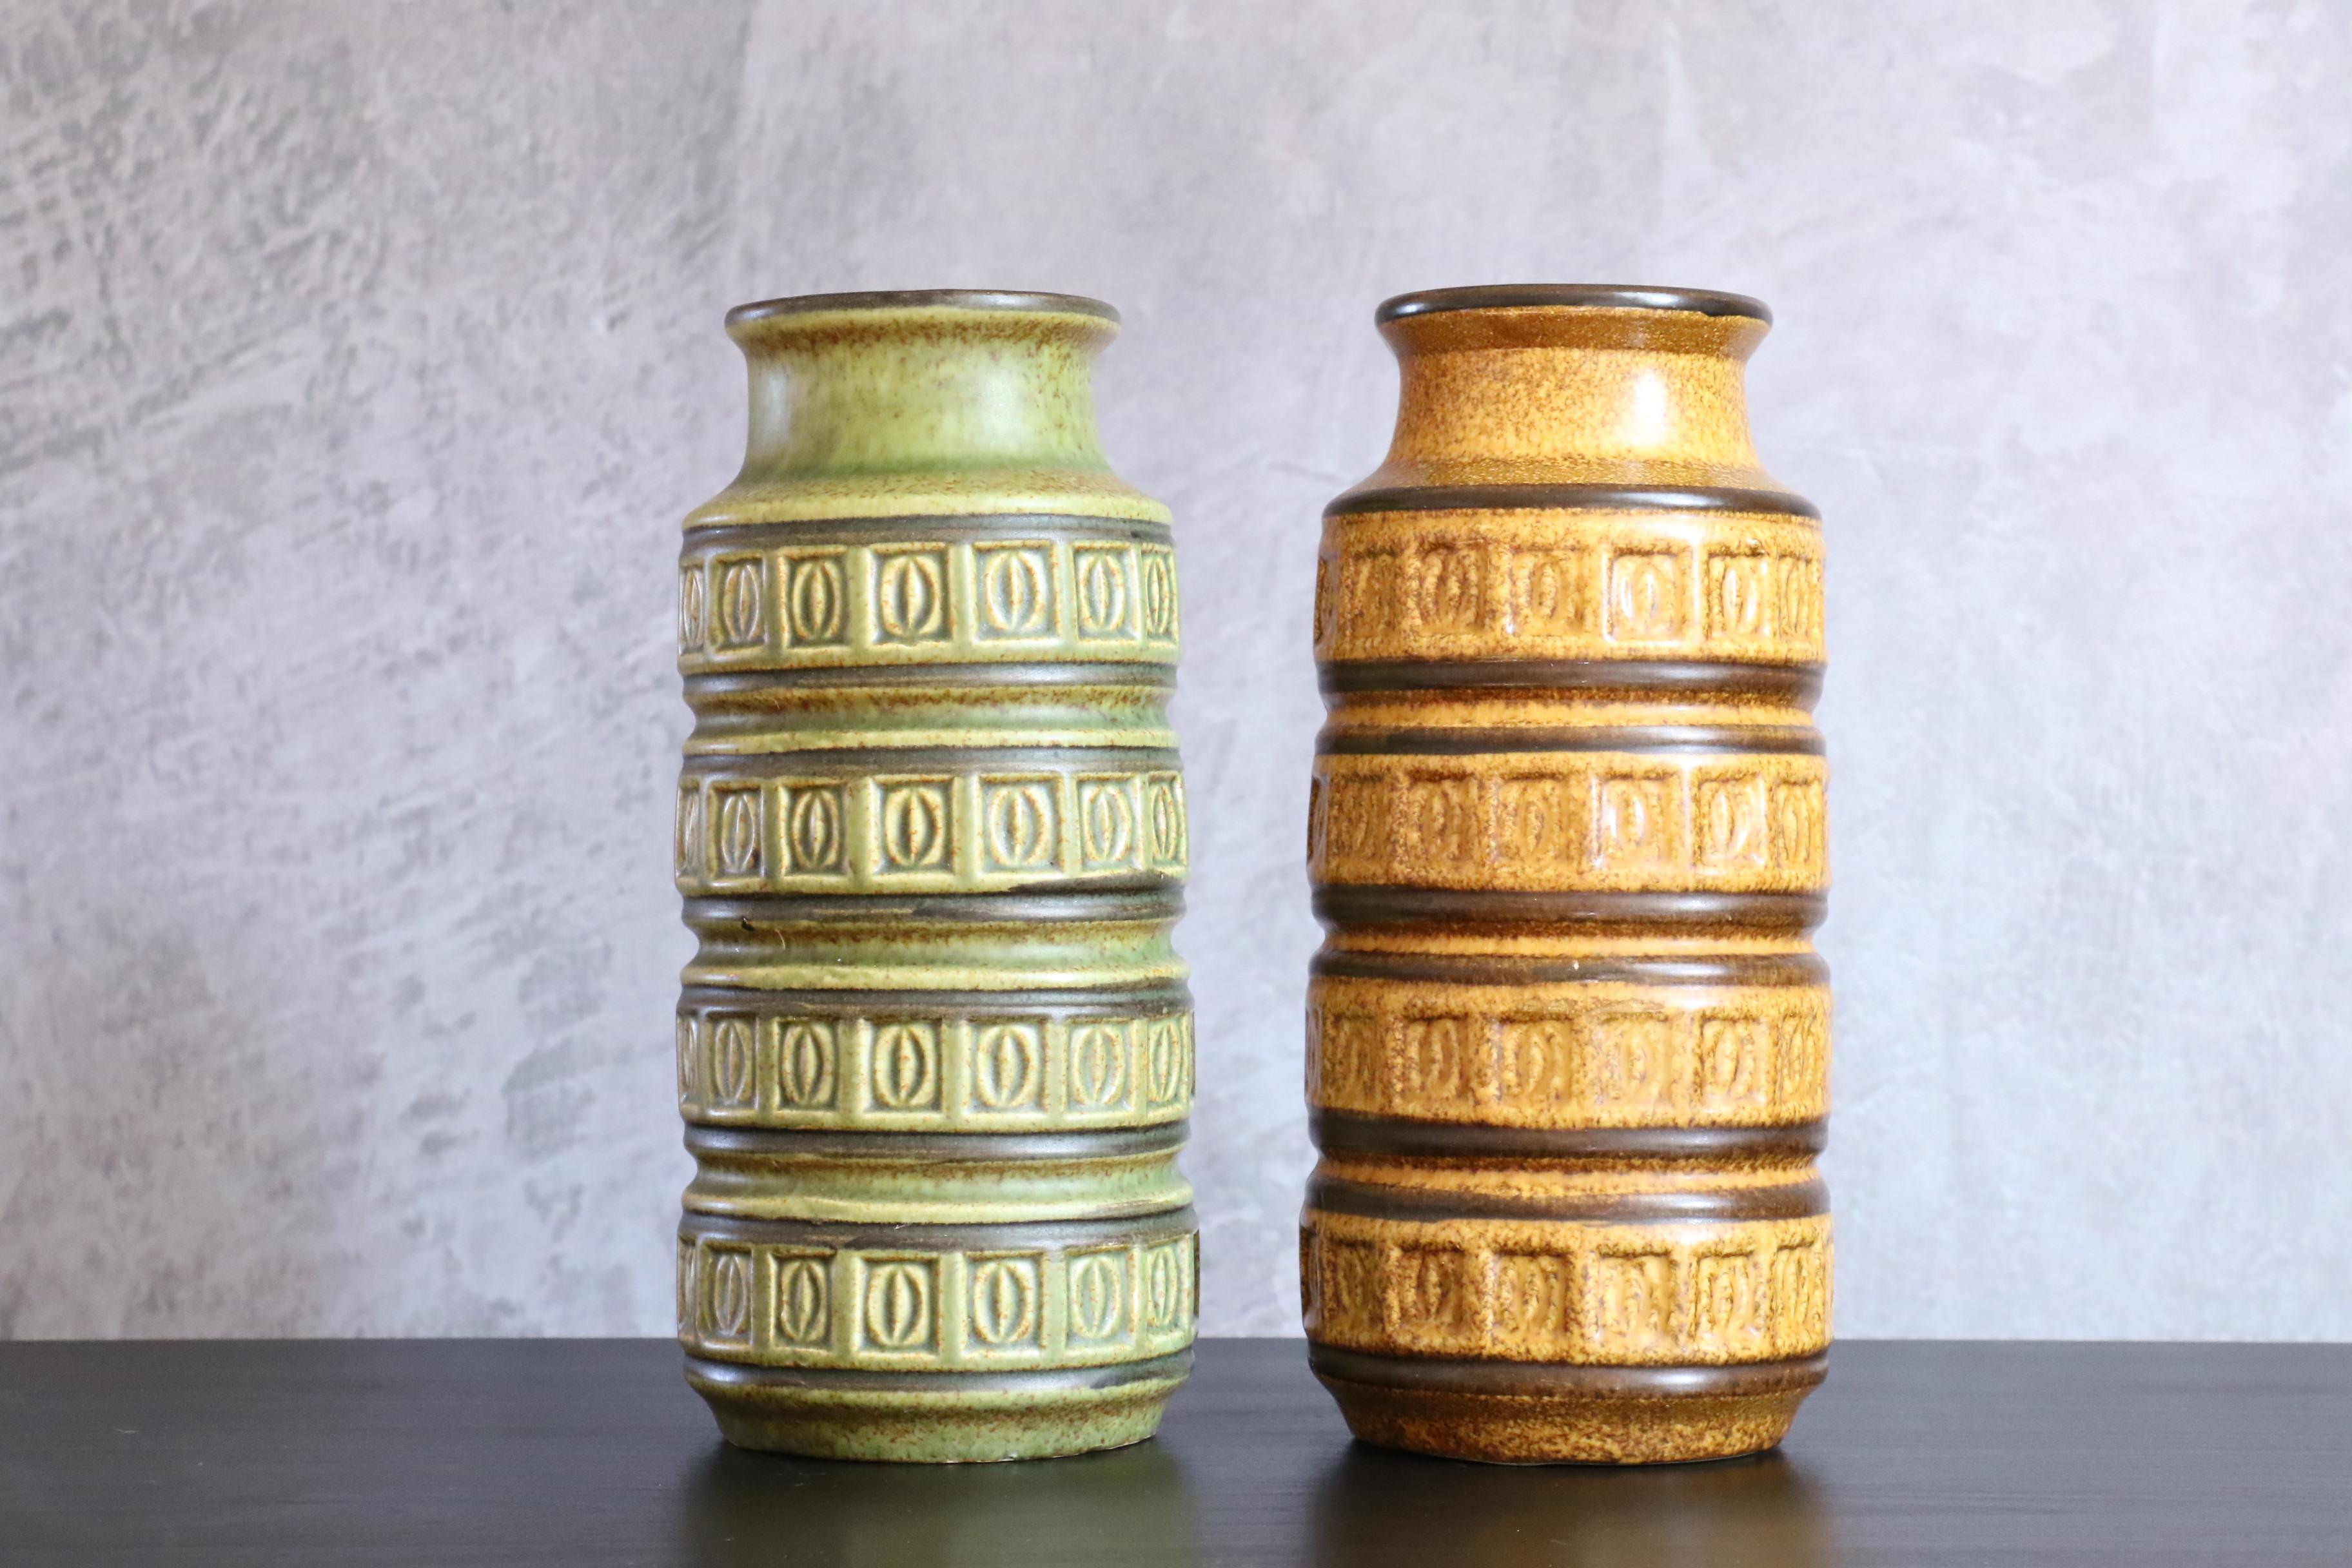 Pair of Mid-Century Modernist West German vases by Scheurich Keramik, circa 1970

Beautiful and silky green and amber color with embossed relief pattern or motif. Classic 1970s Western Germany design.

On the last two pictures you can see other